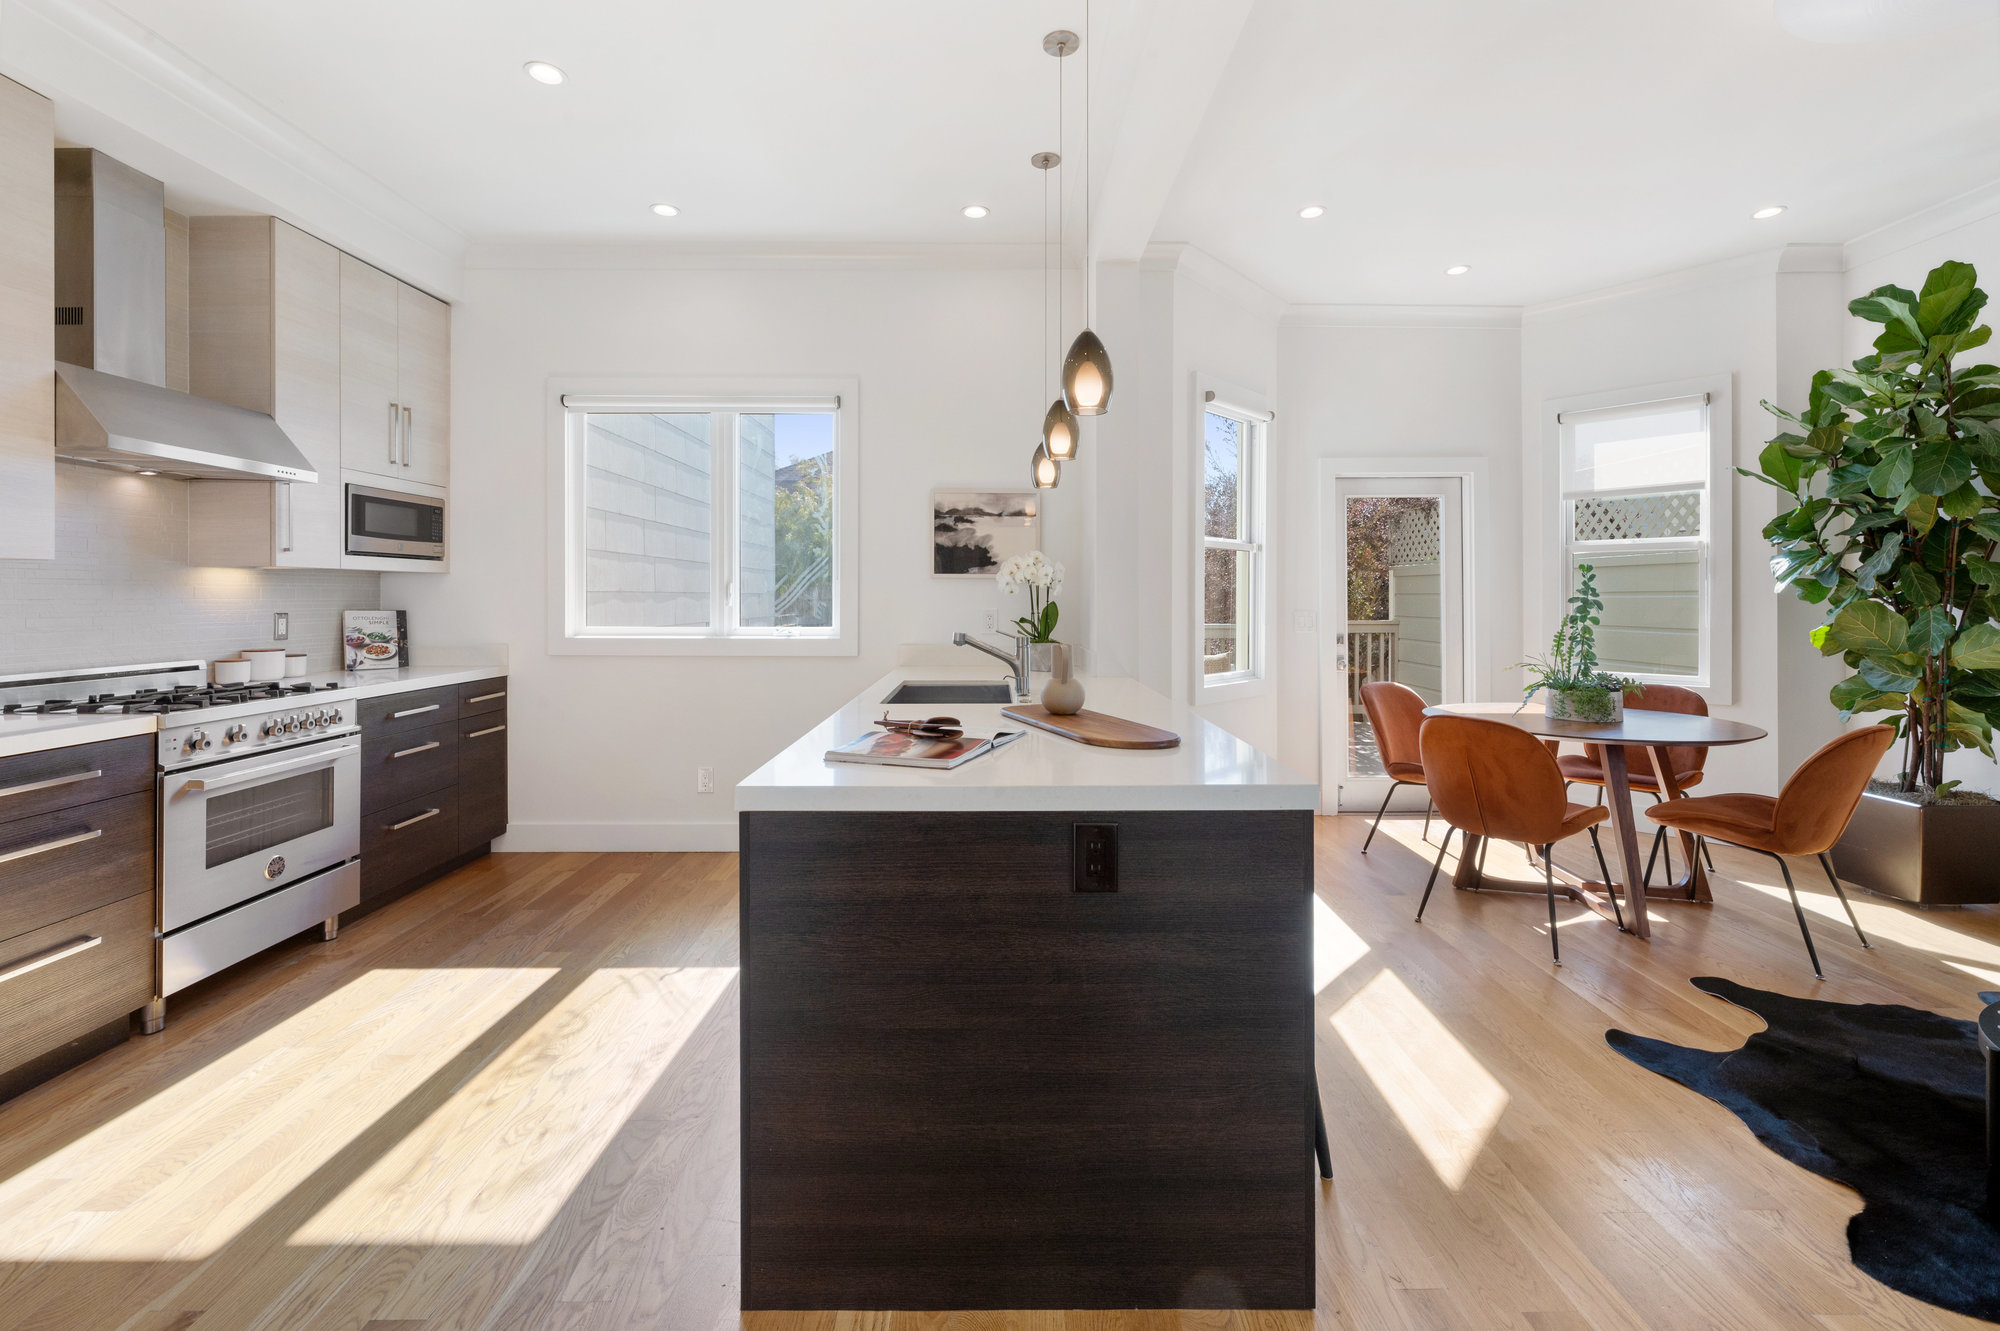 Property Photo: Open floor-plan view of 719 18th Avenue, showing the kitchen and main living area